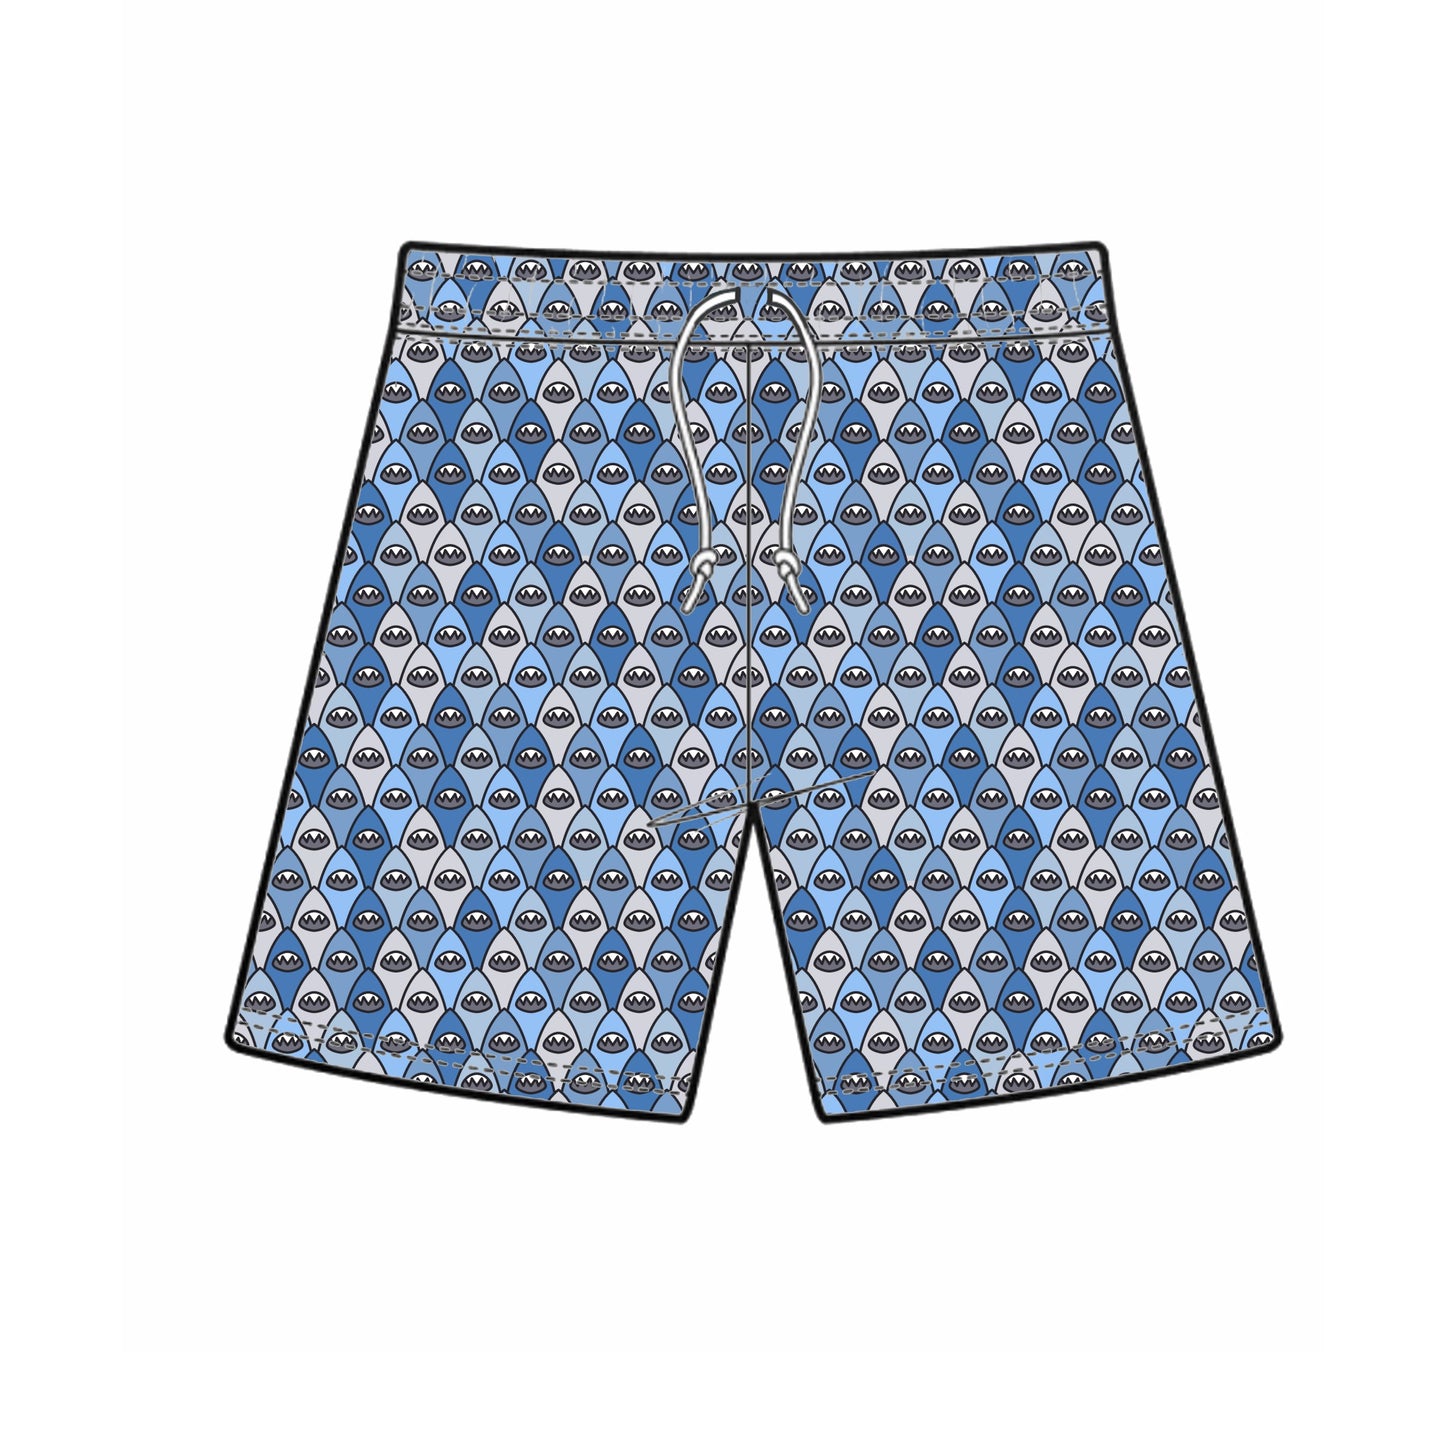 Mock up of Boys shark bite blue and grey colored swim shorts